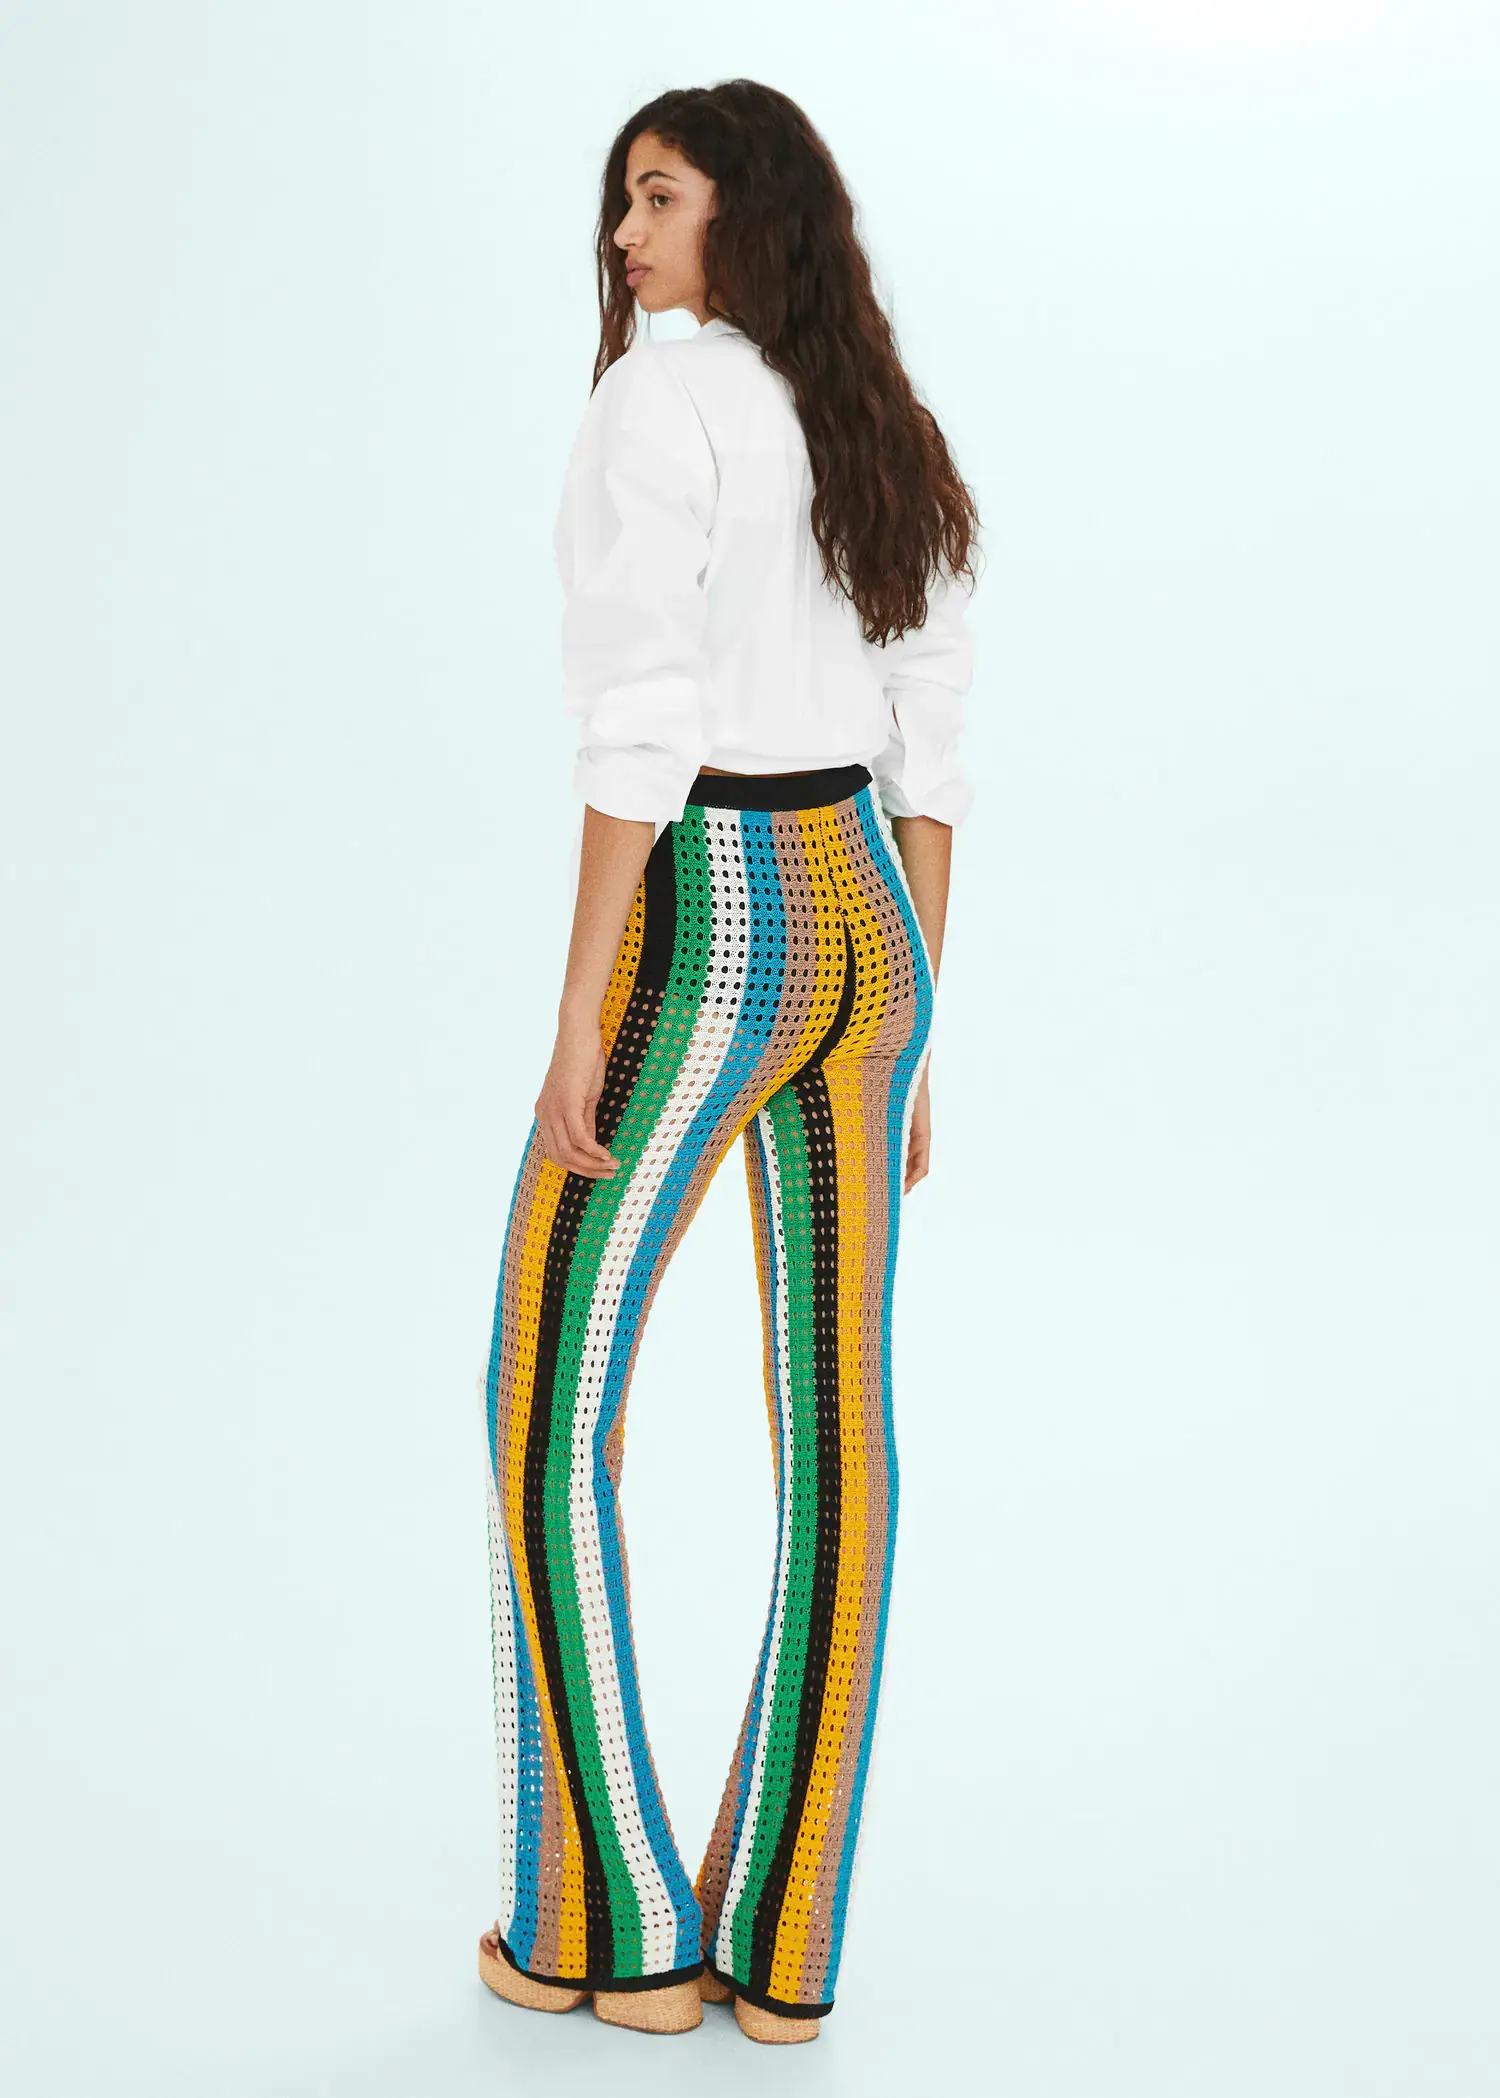 Mango Openwork knit trousers. a woman wearing a white shirt and colorful pants. 